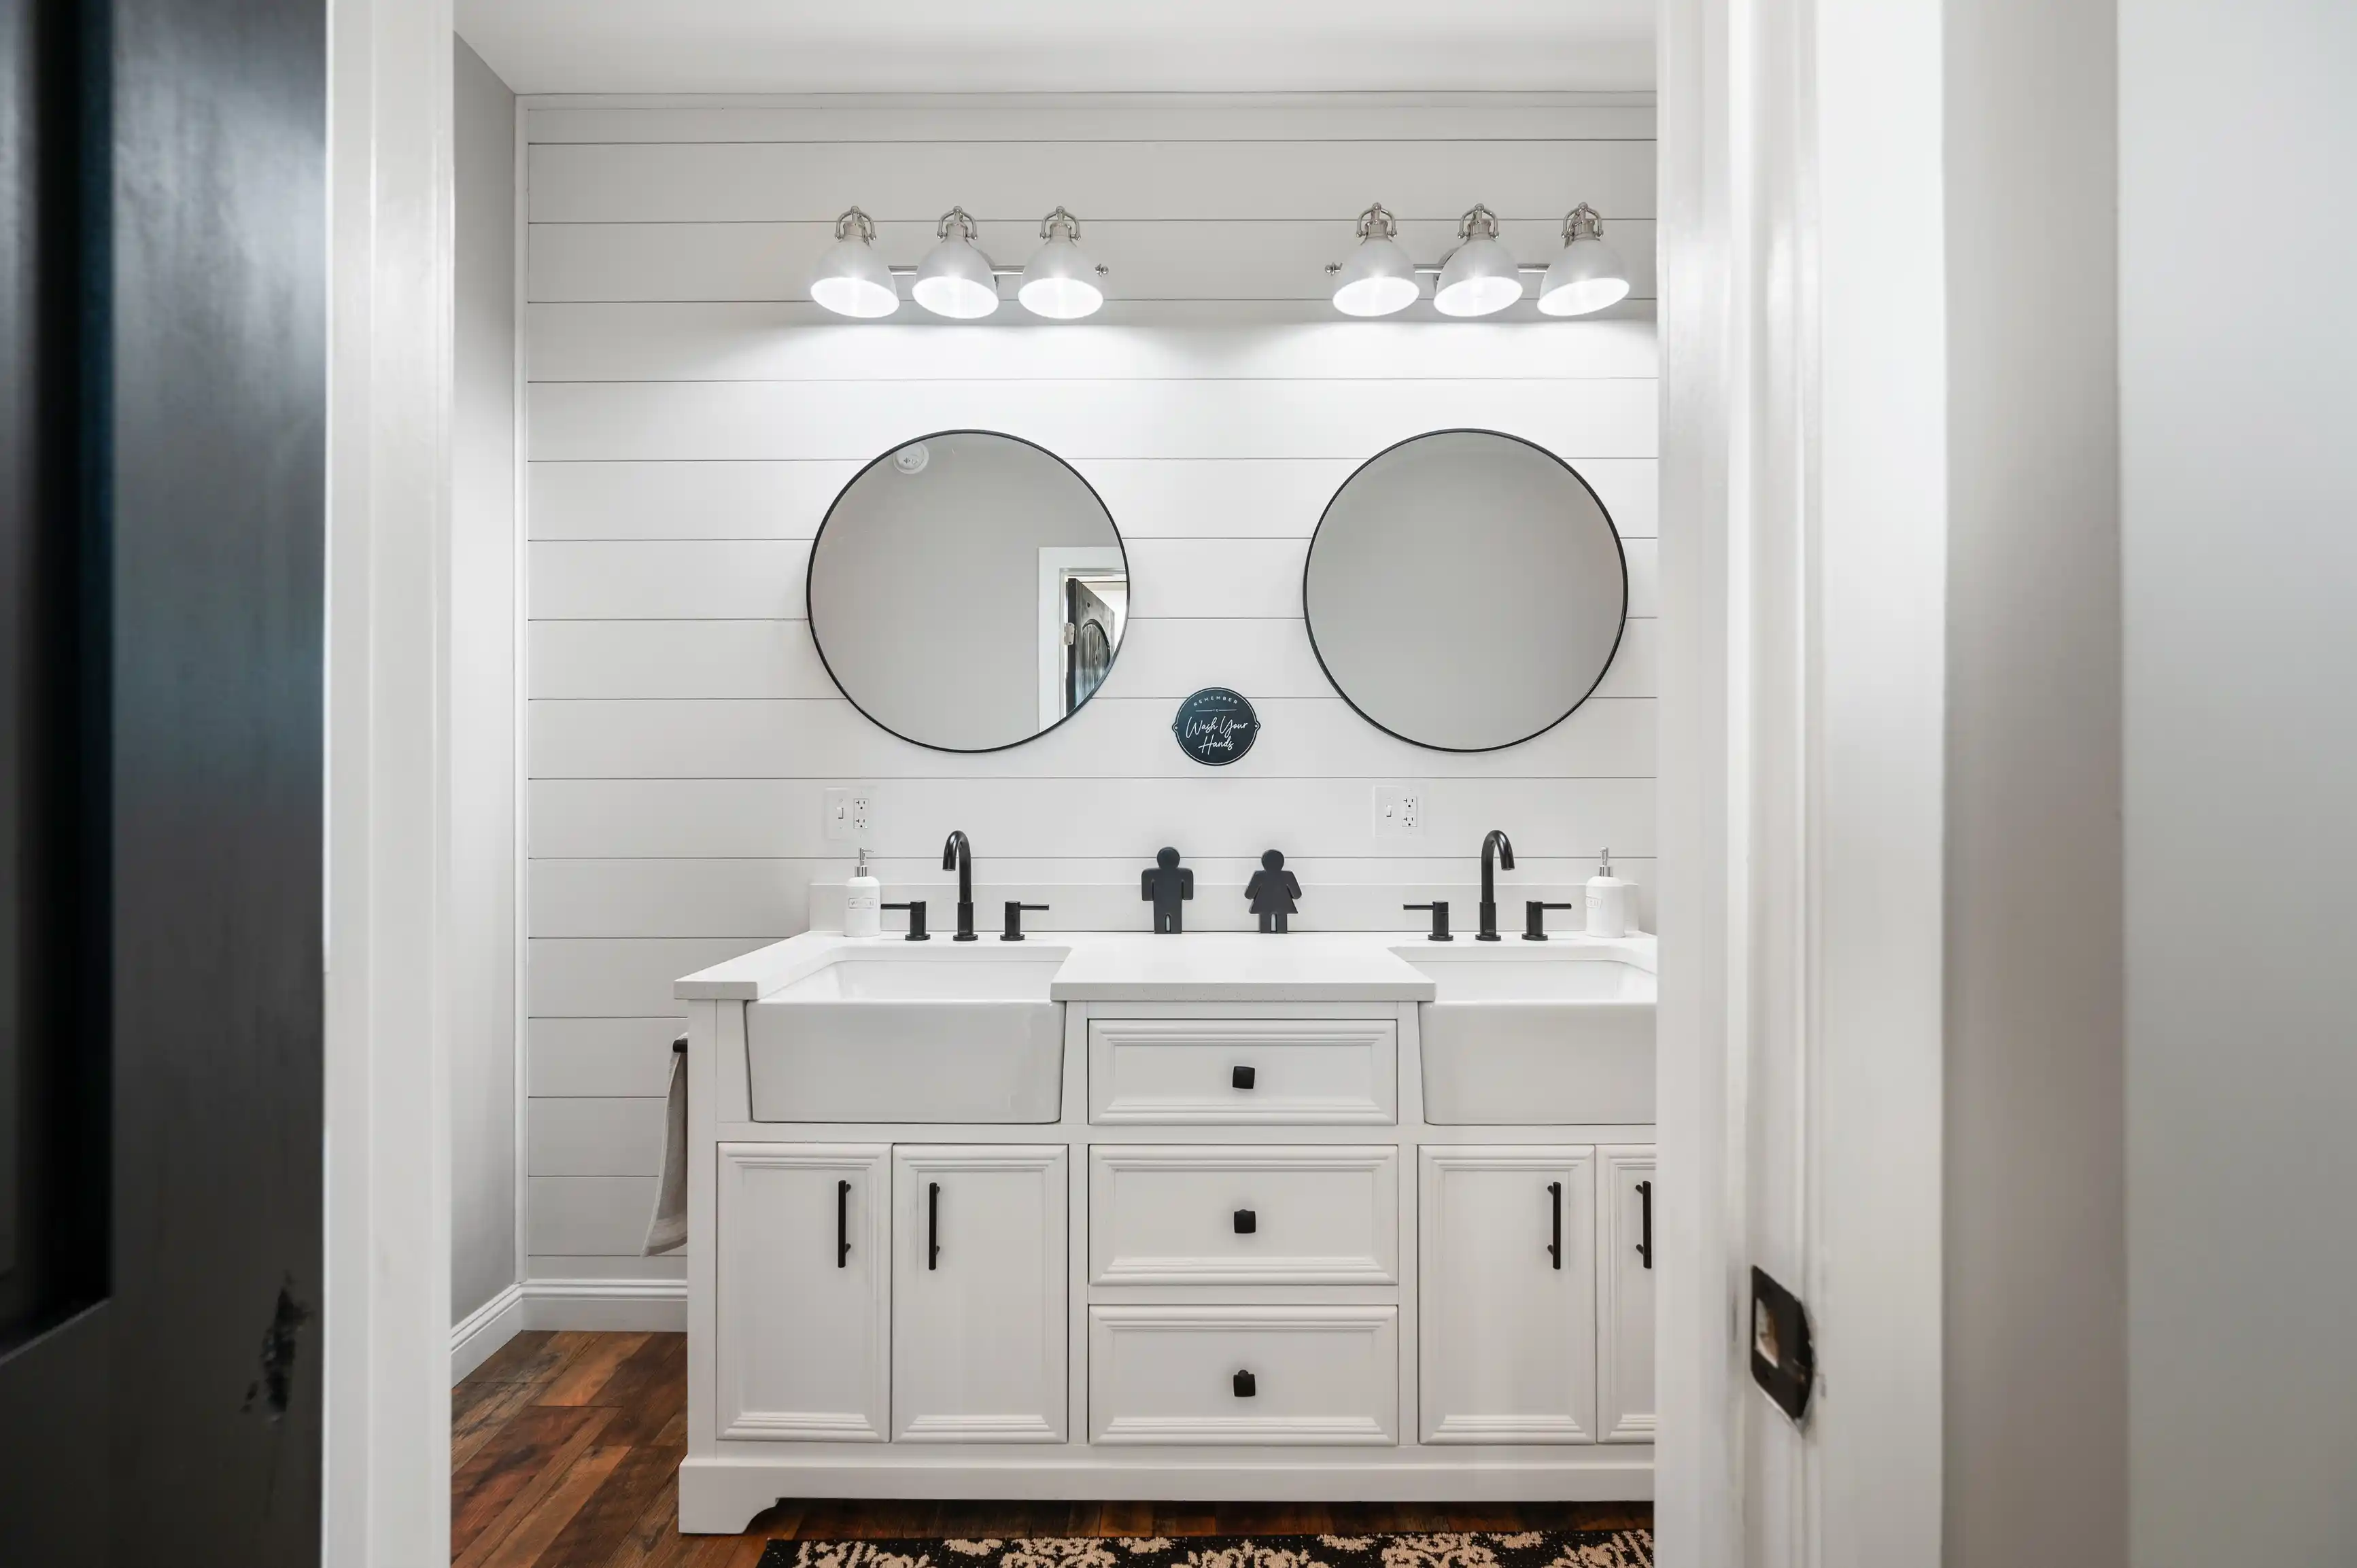 Modern bathroom interior with double sink vanity, black fixtures, two round mirrors, and shiplap wall.